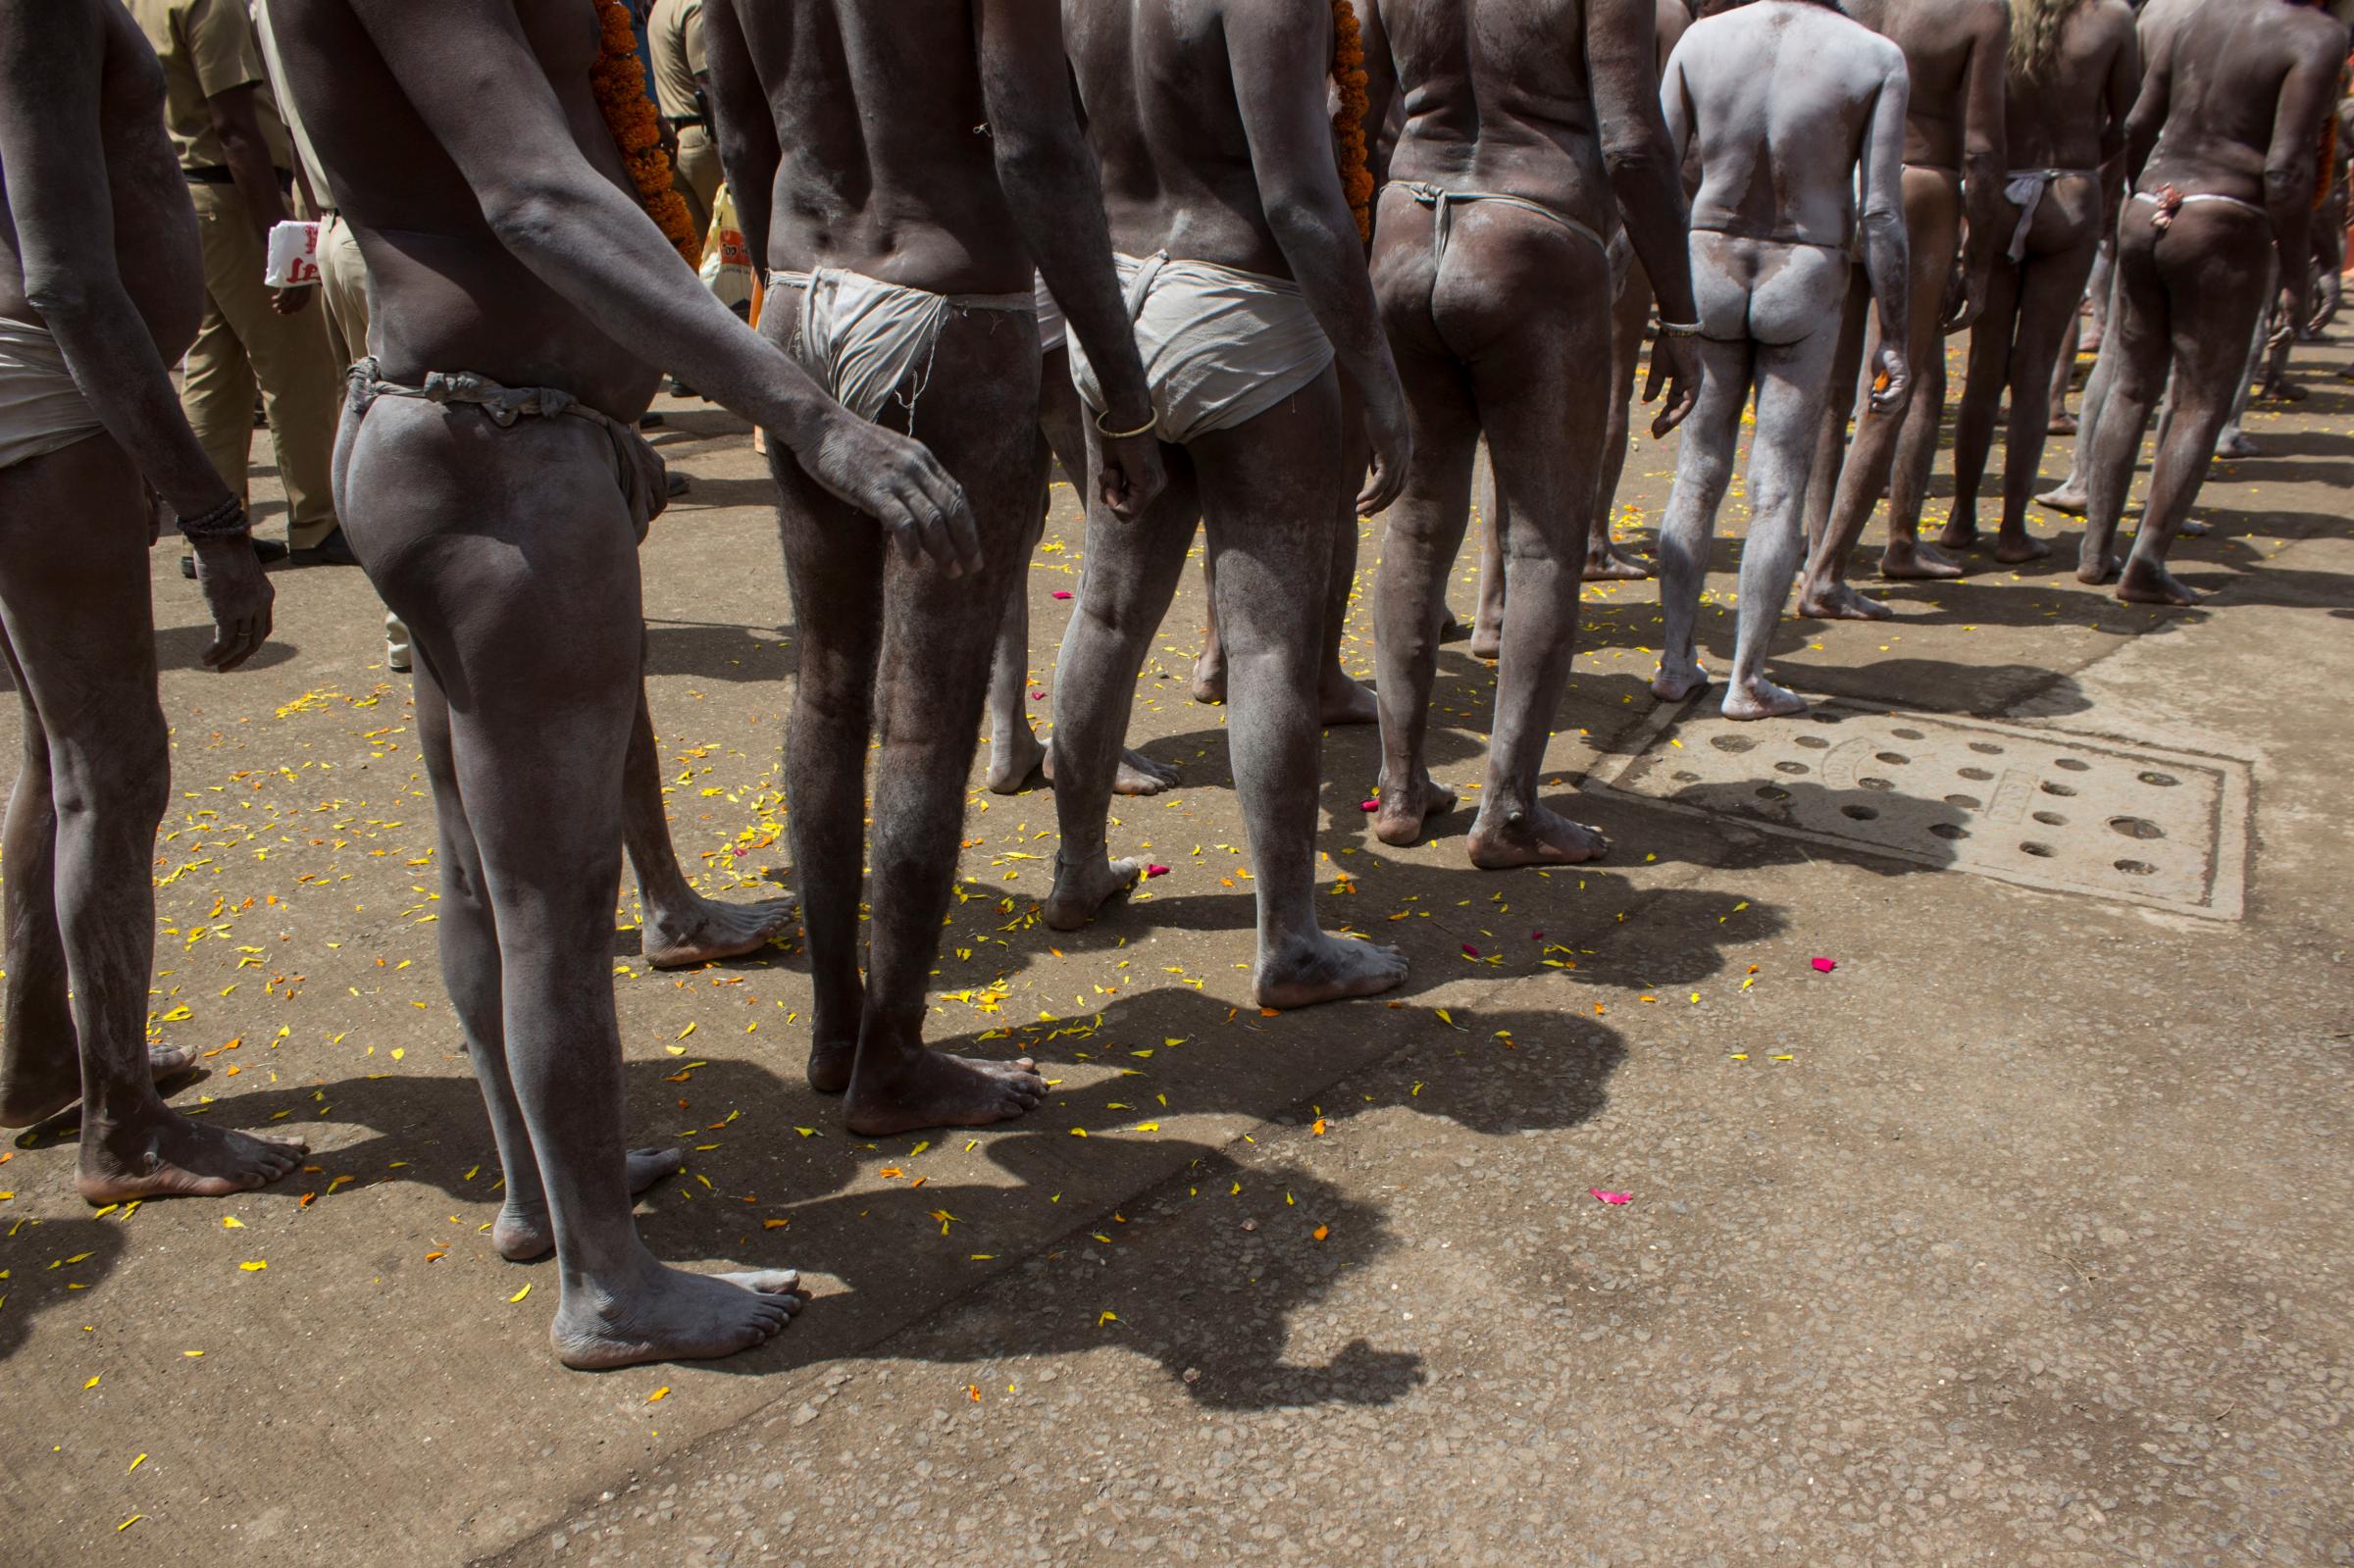 TRIMBAK, NASIK, MAHARASHTRA, INDIA - 2015/08/27: Naga sadhu from Atal Akhada join the Royal Procession in Trimbak.  The Peshwai marks the arrival of the members of an Akhara or sect of sadhus, at the Maha Kumbh Mela venue. Thousands of members of Akhara, including ash-smeared Naga sadhus who are bare-bodied and others who are clad in saffron robes, led the procession. The procession,  includes dozens of beautifully decorated horses, elephants and musical bands playing devotional tunes, as it commenced in Trimbak City . (Photo by Akshay Gupta/Pacific Press/LightRocket via Getty Images)